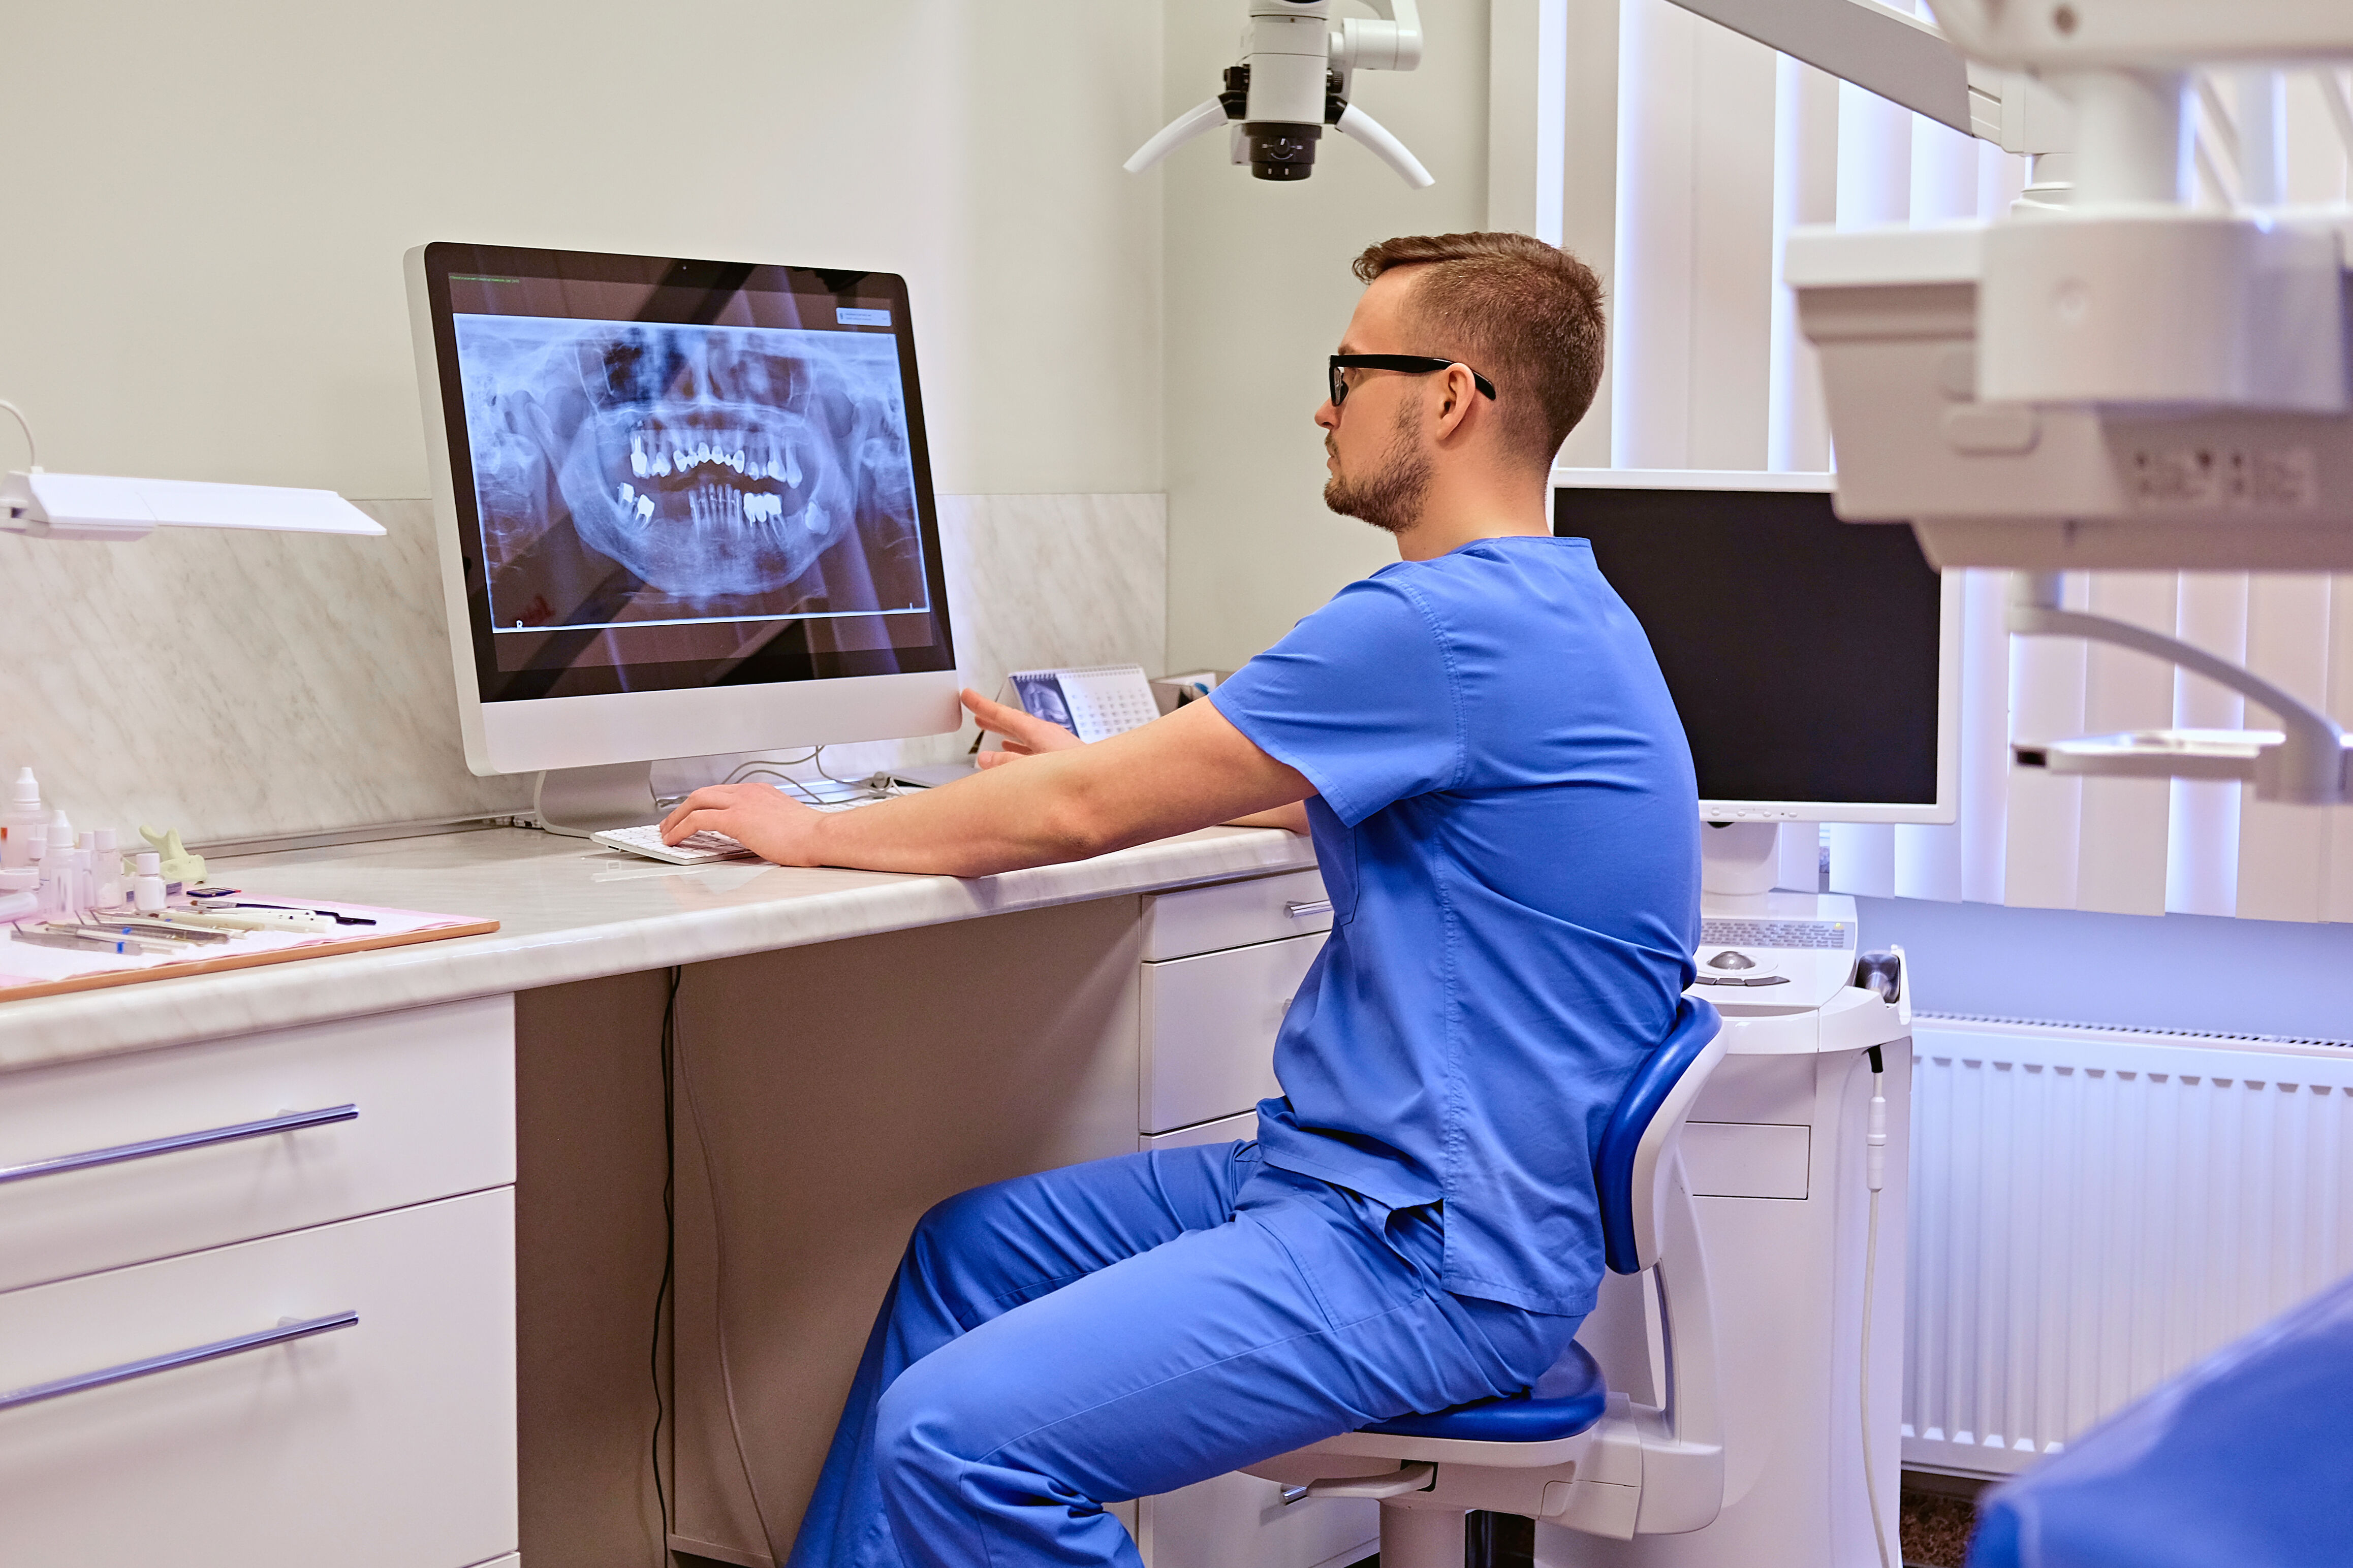 Watchdog rubber-stamps cavity-detecting neural network for dentists